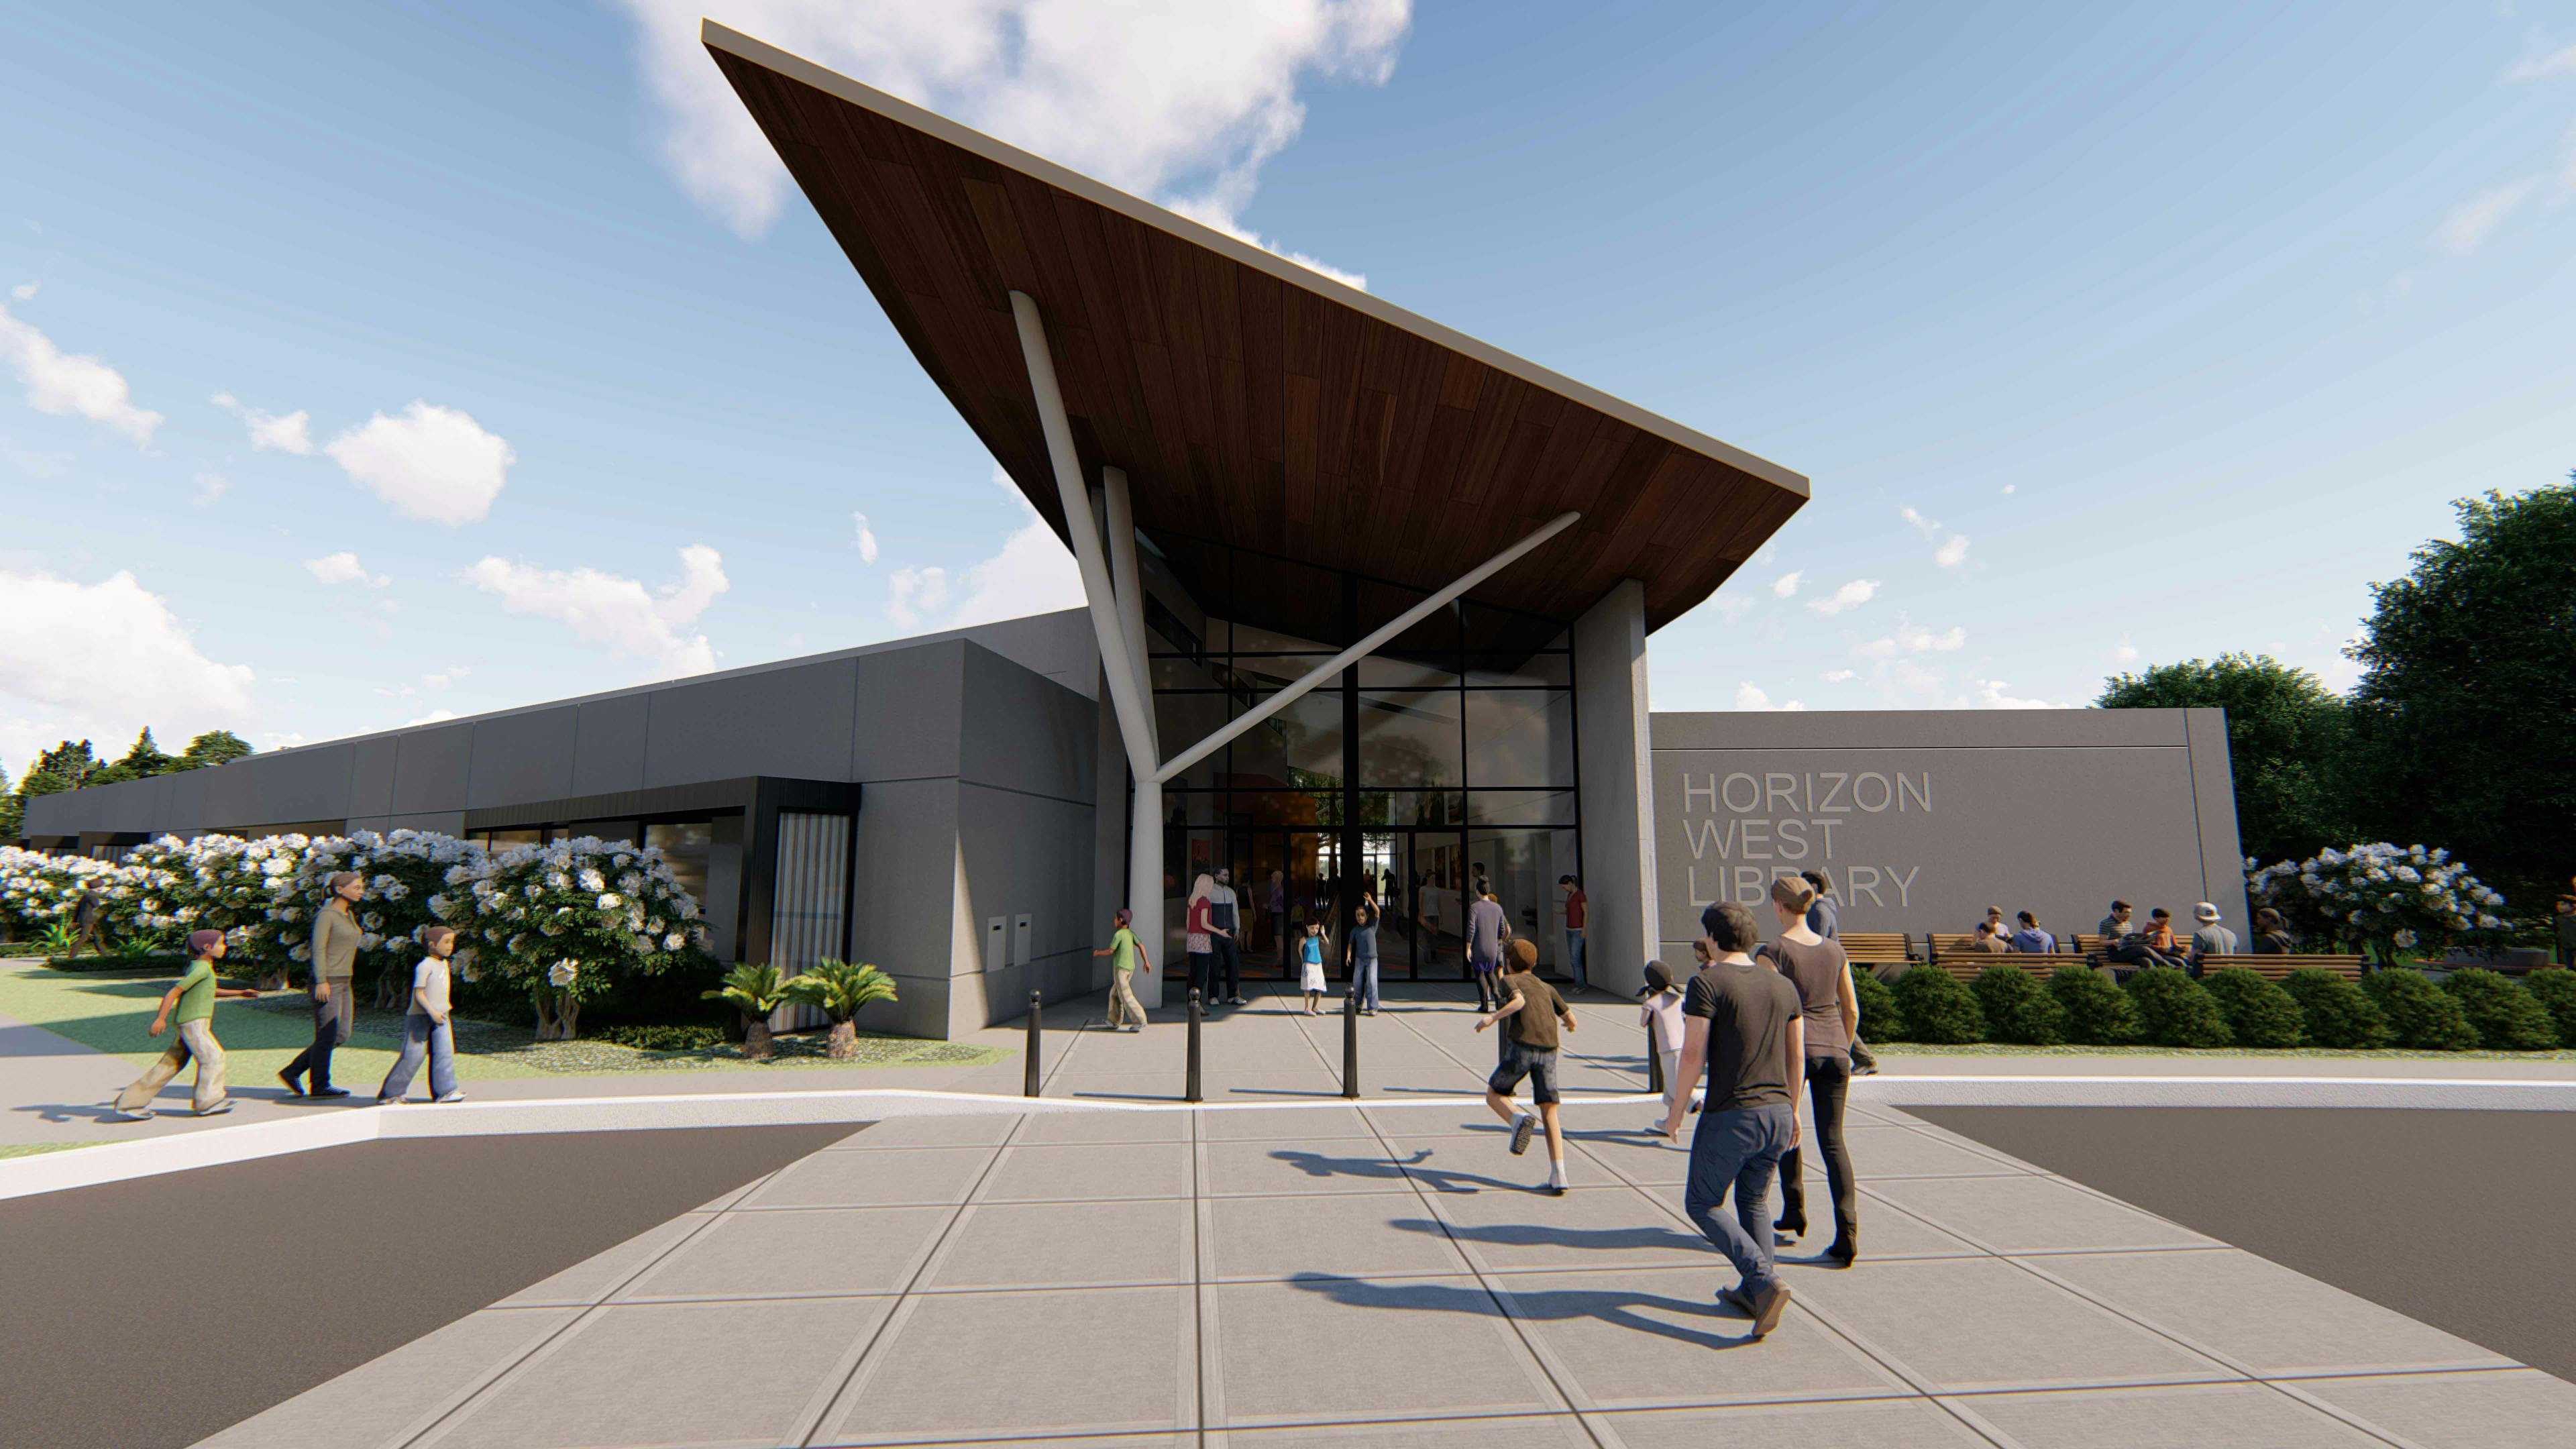 OCLS & B+P Unveil Renderings for Future Horizon West Library